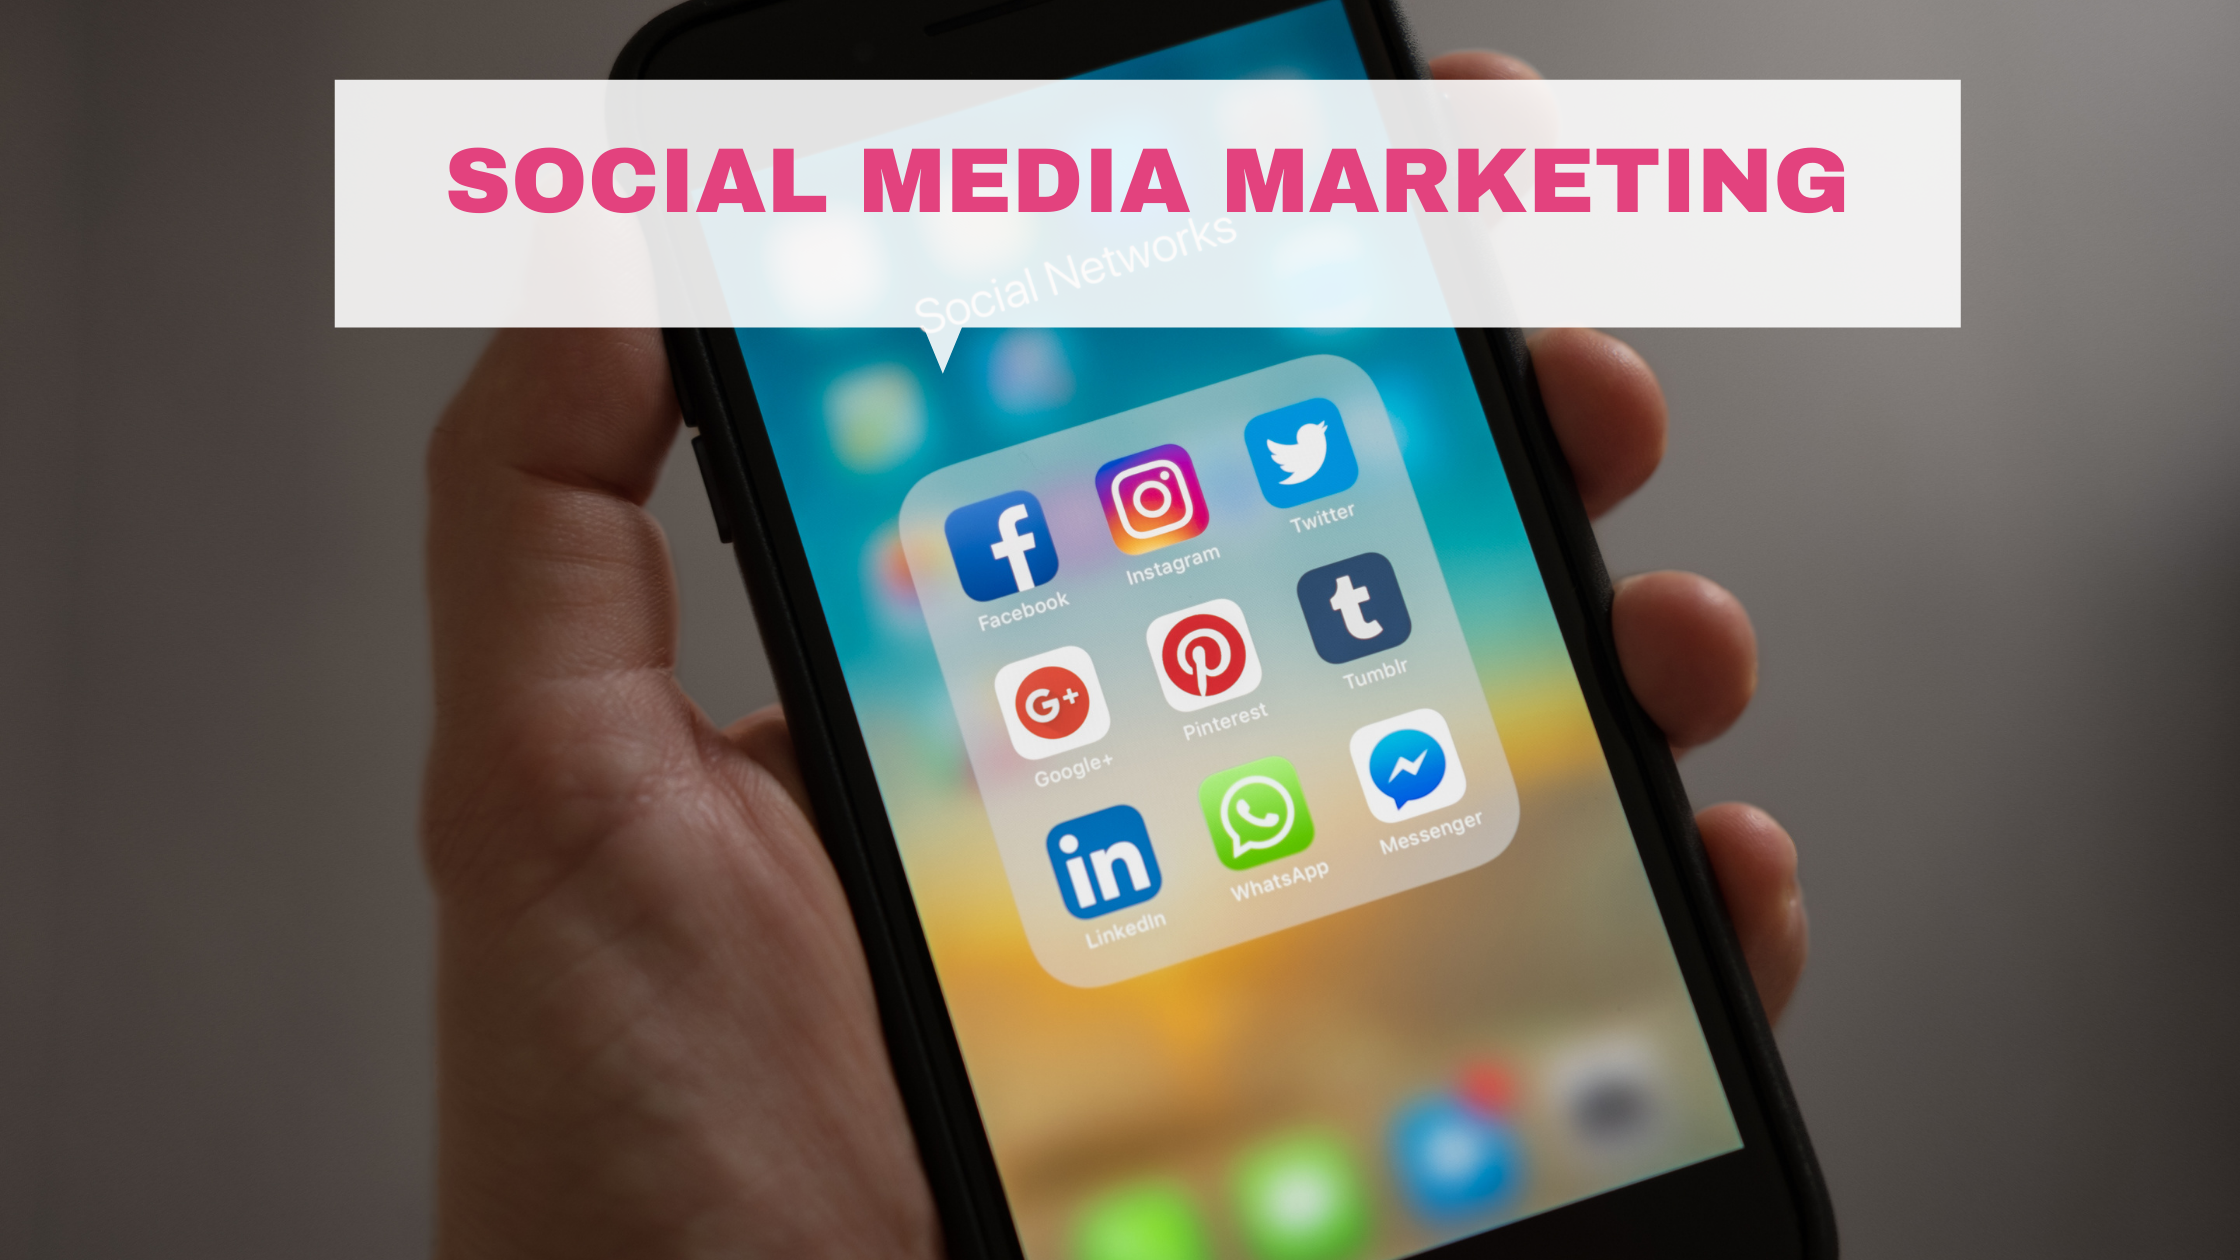 SMM helps to build your brand, increase website traffic and sales by using social media platforms.